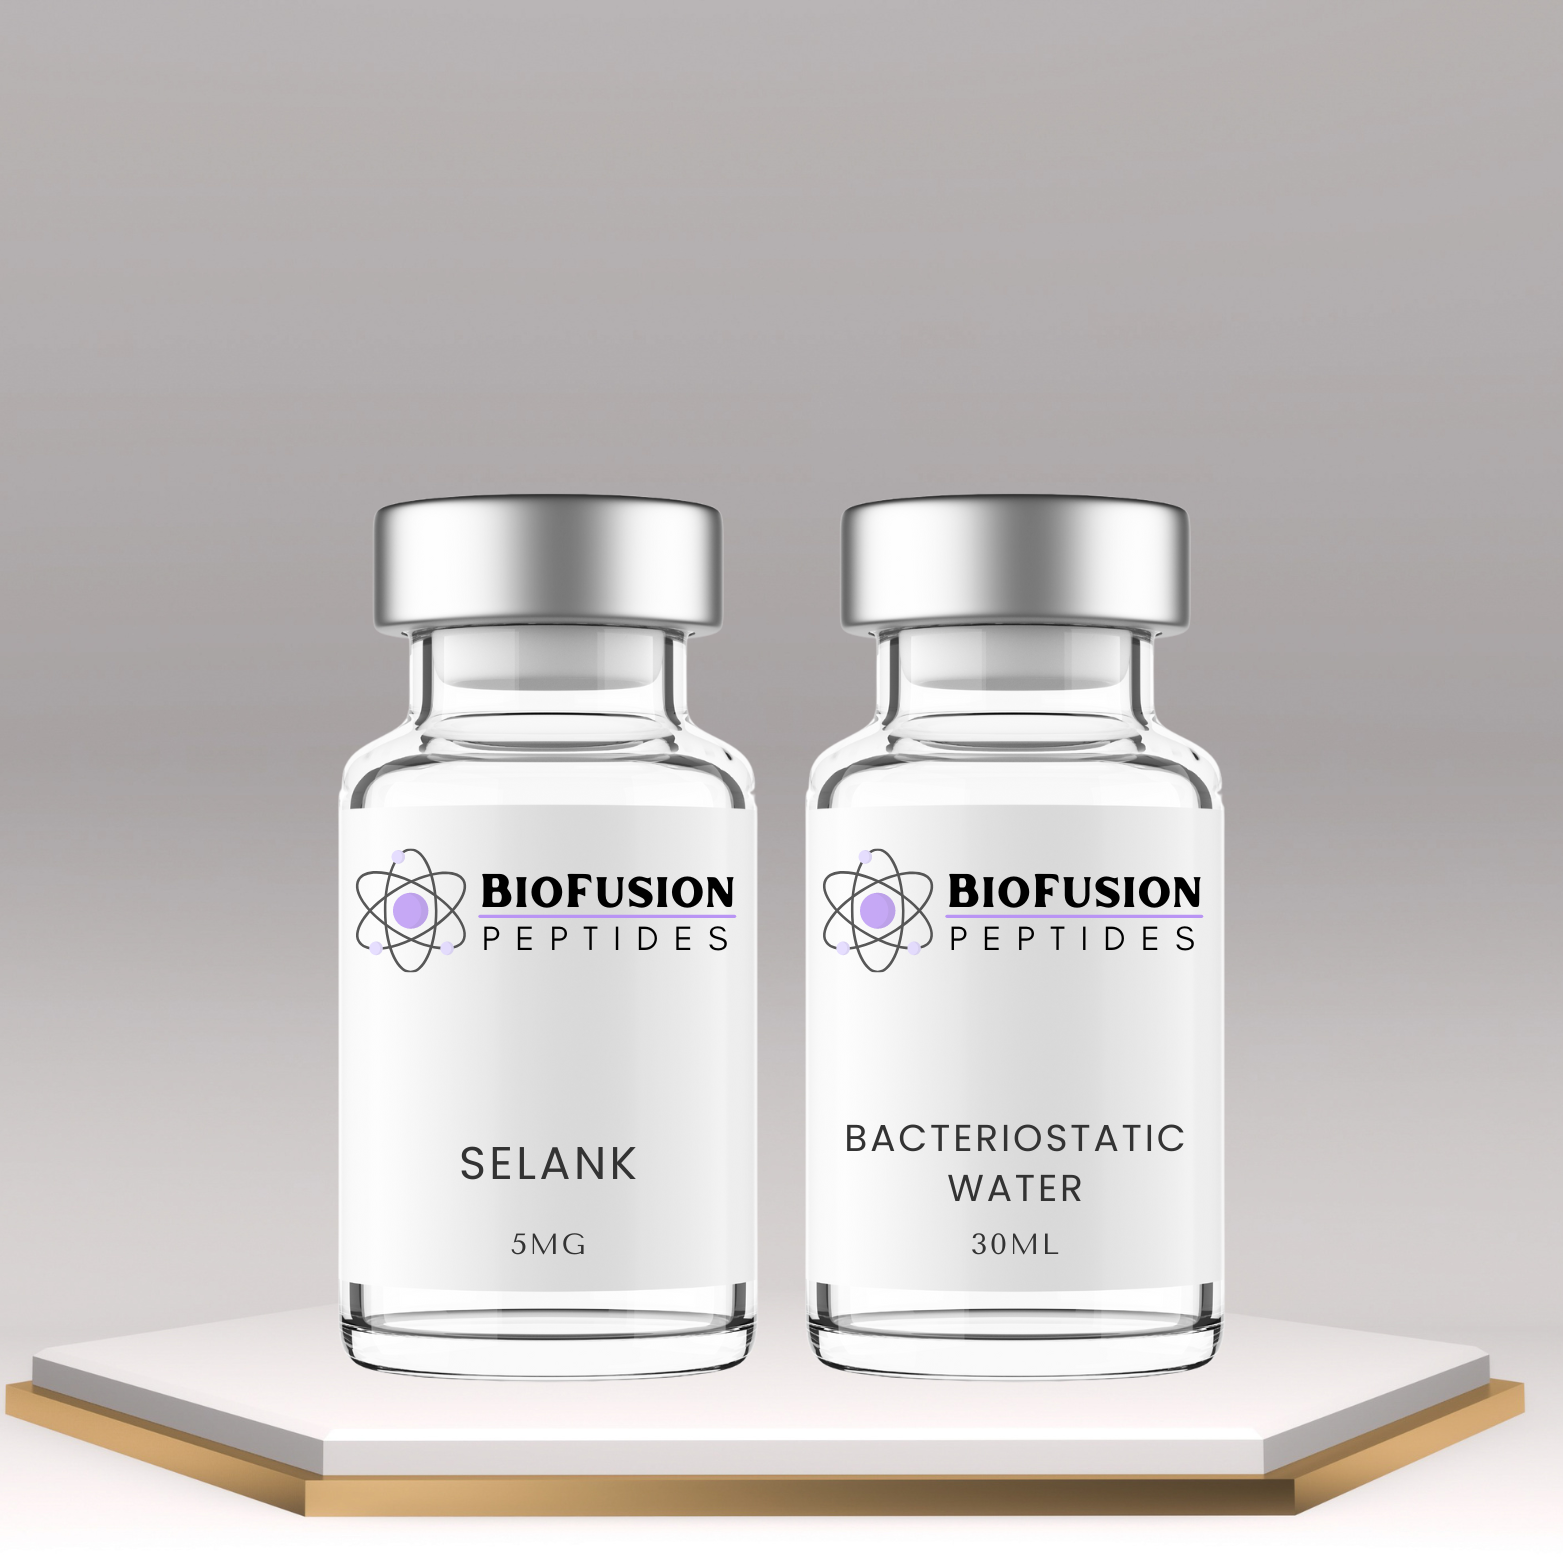 BioFusion Peptides Selank kit with bacteriostatic water